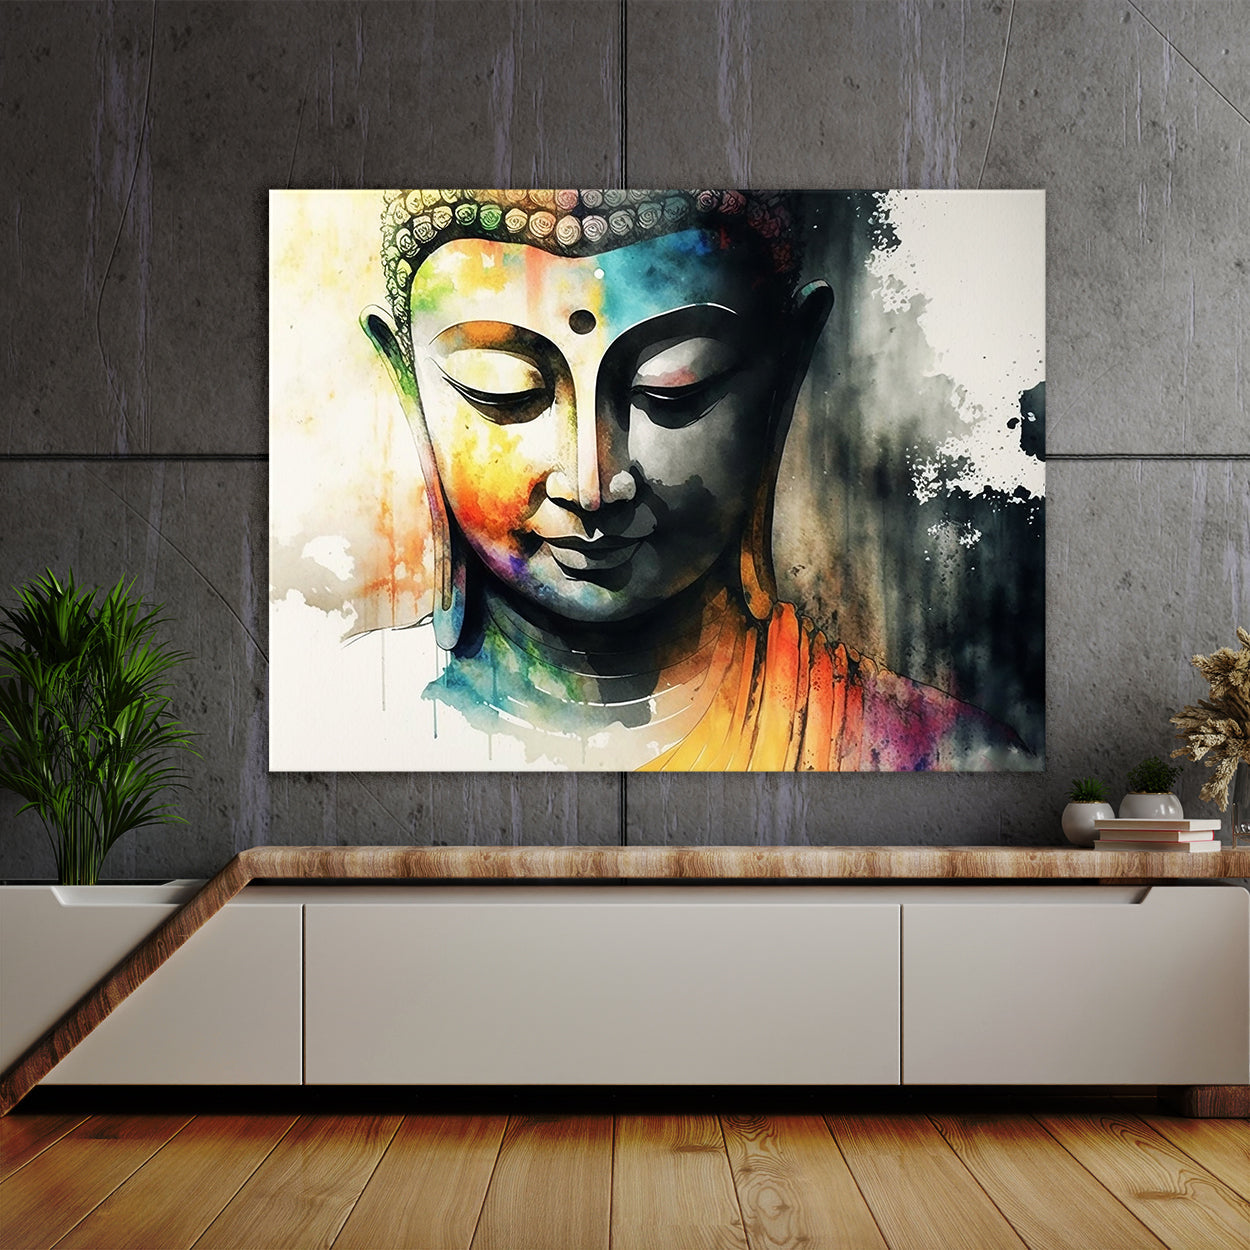 Art in the Moment. Buddha Boards. —